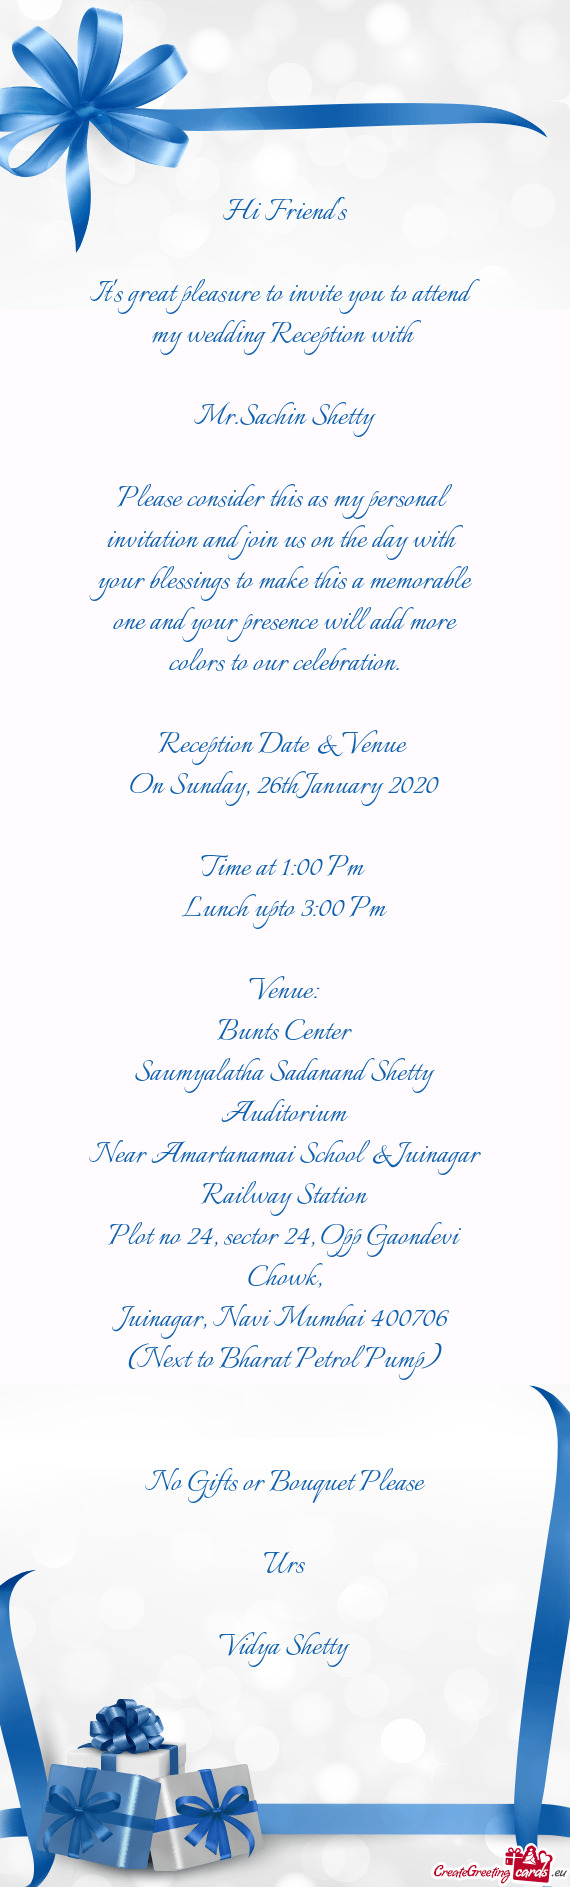 It's great pleasure to invite you to attend my wedding Reception with